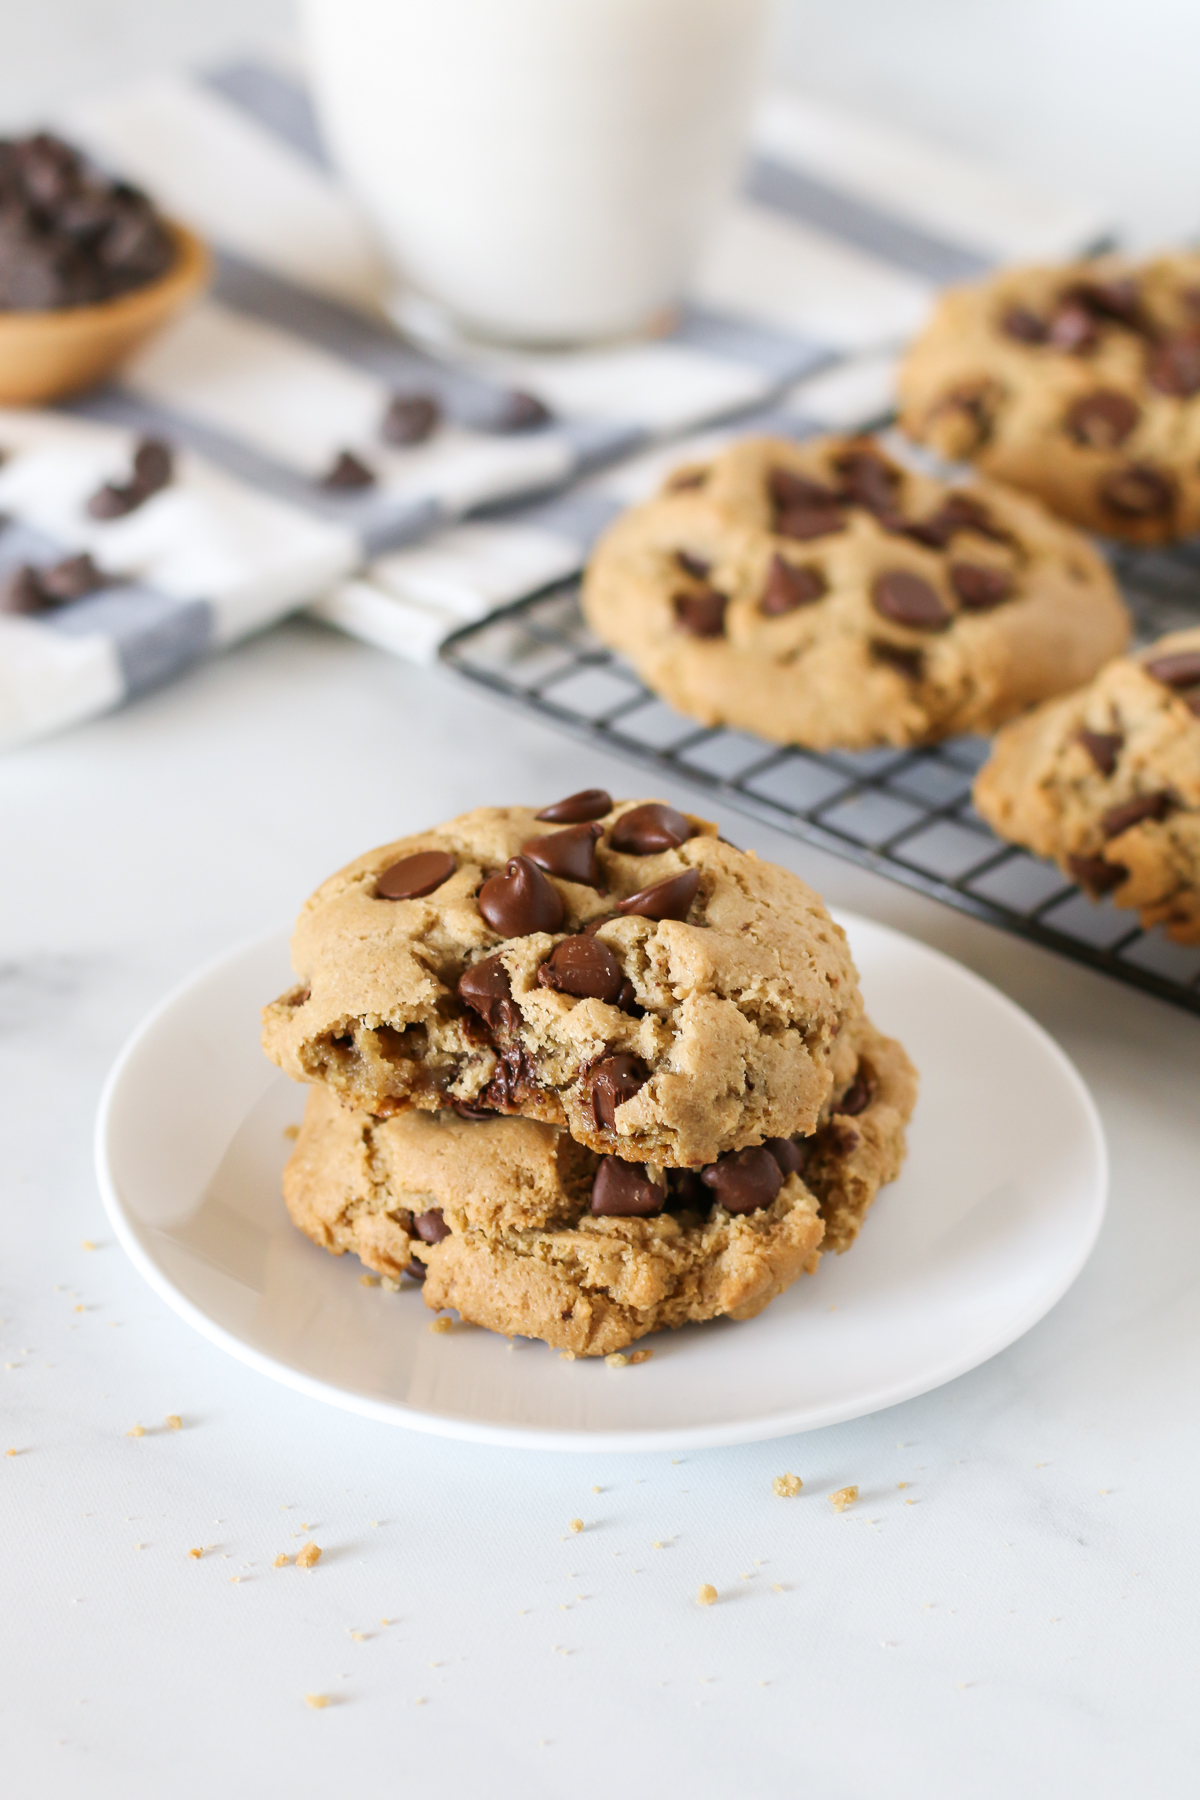 Gluten Free Vegan Big Fat Chocolate Chip Cookies. Loaded with chocolate chips, gooey on the inside and crispy on the edges. Chocolate chip cookie perfection!